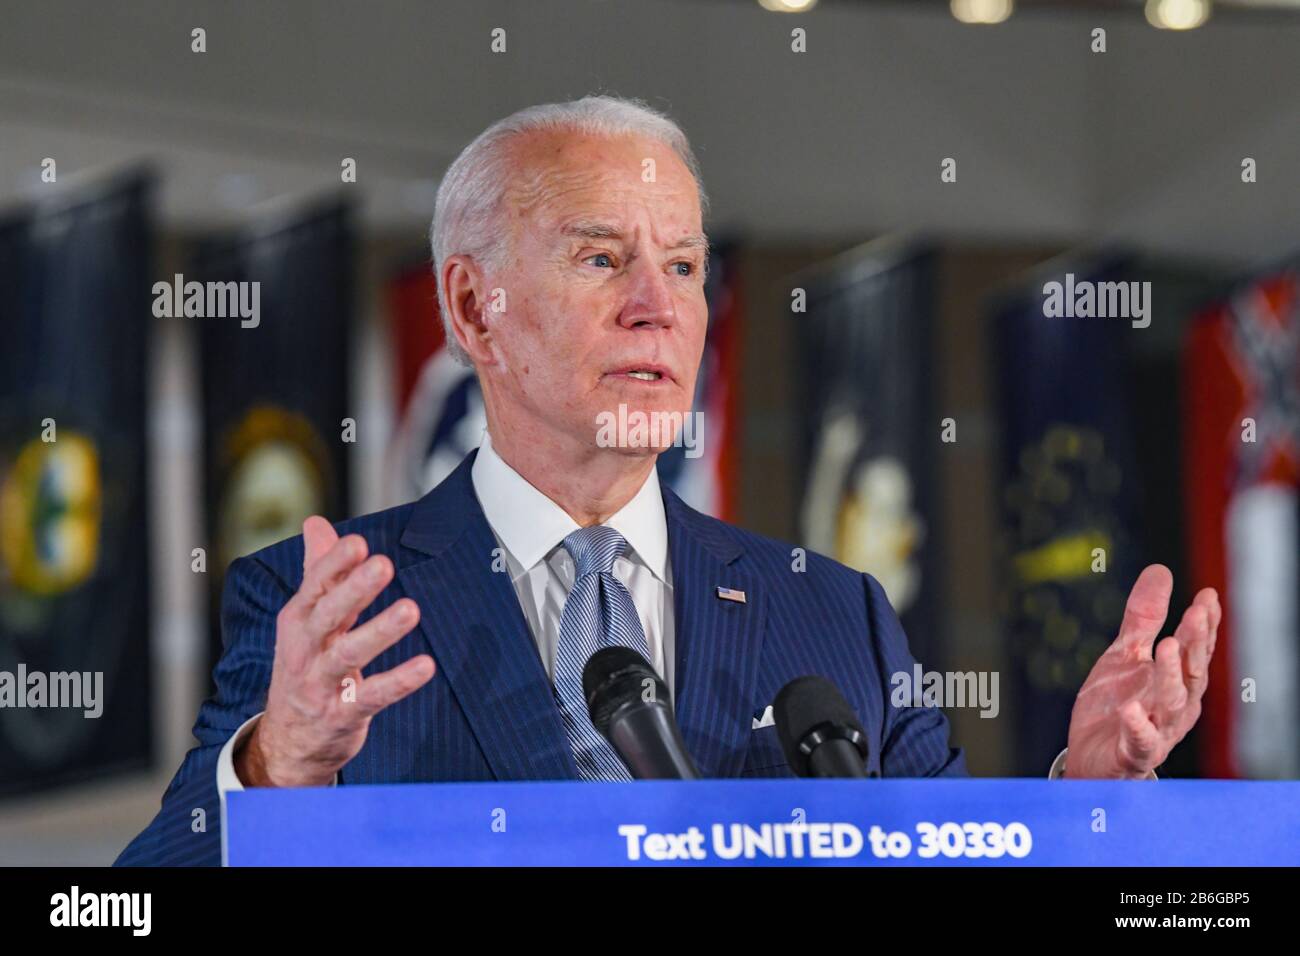 Joe Biden, U.S. President as the United States democratic presidential candidate and former Vice President of the United States of America speaking at the National Convention Center in Philadelphia PA during primary voting Stock Photo